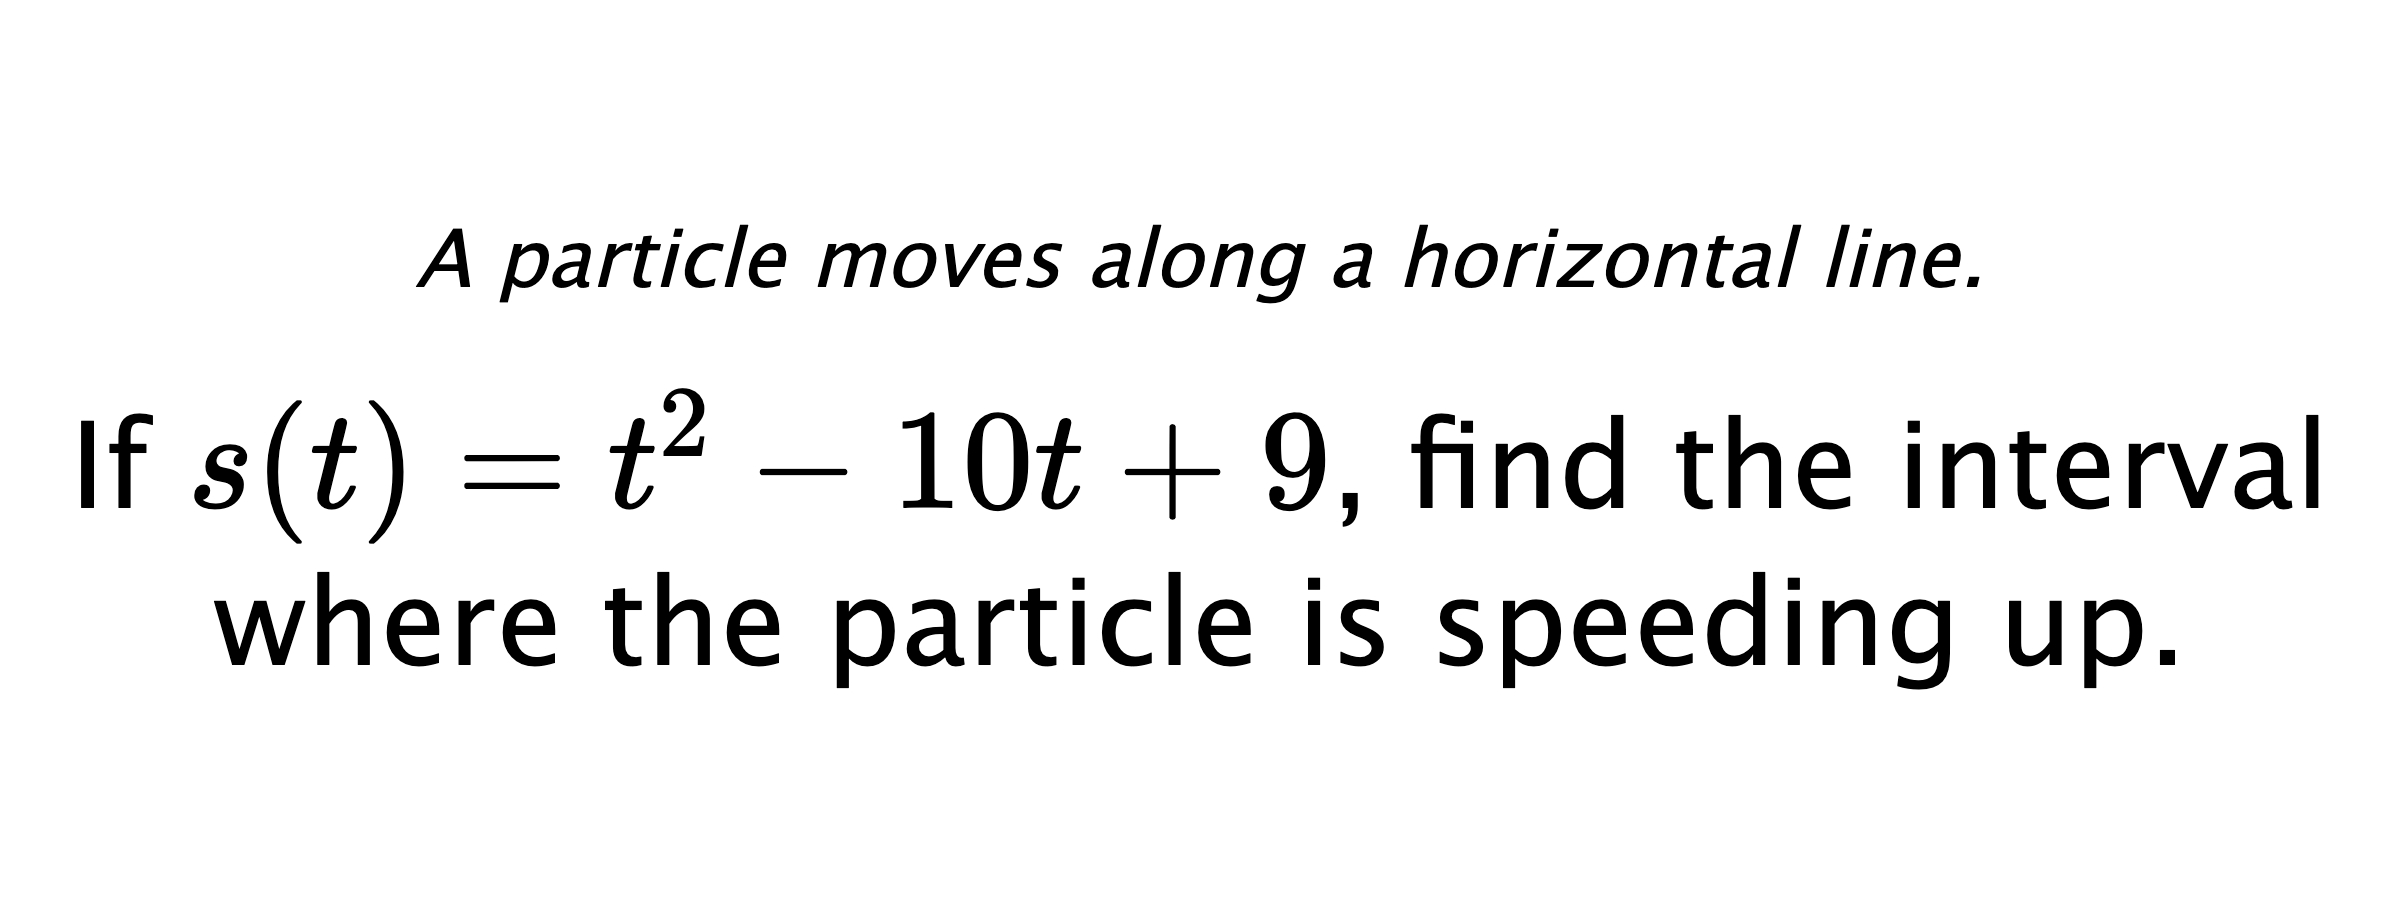 A particle moves along a horizontal line. If $ s(t)=t^2-10t+9 $, find the interval where the particle is speeding up.